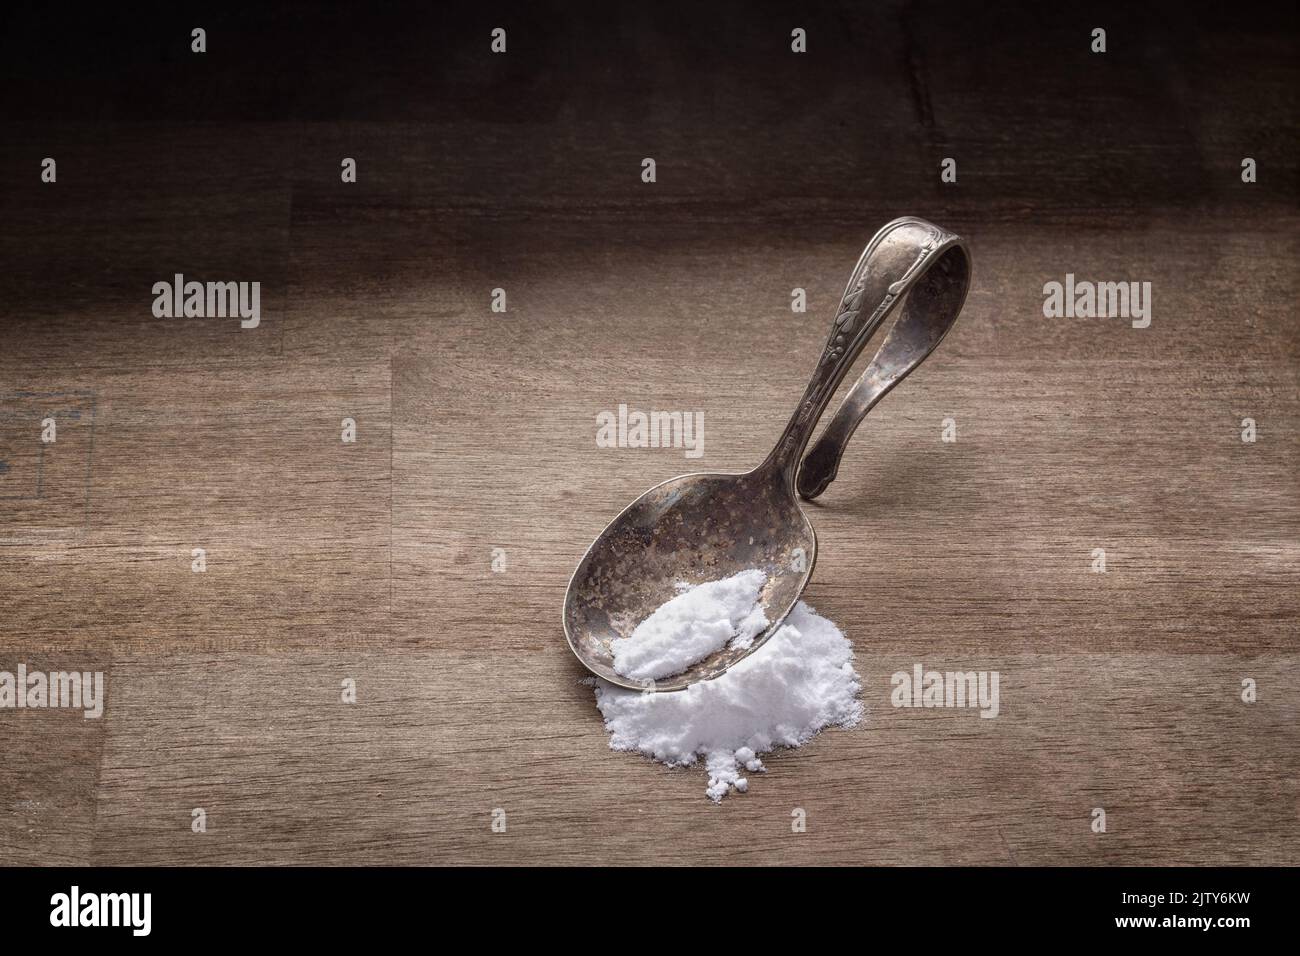 Drug addiction concept with spoon and white powder on wood Stock Photo